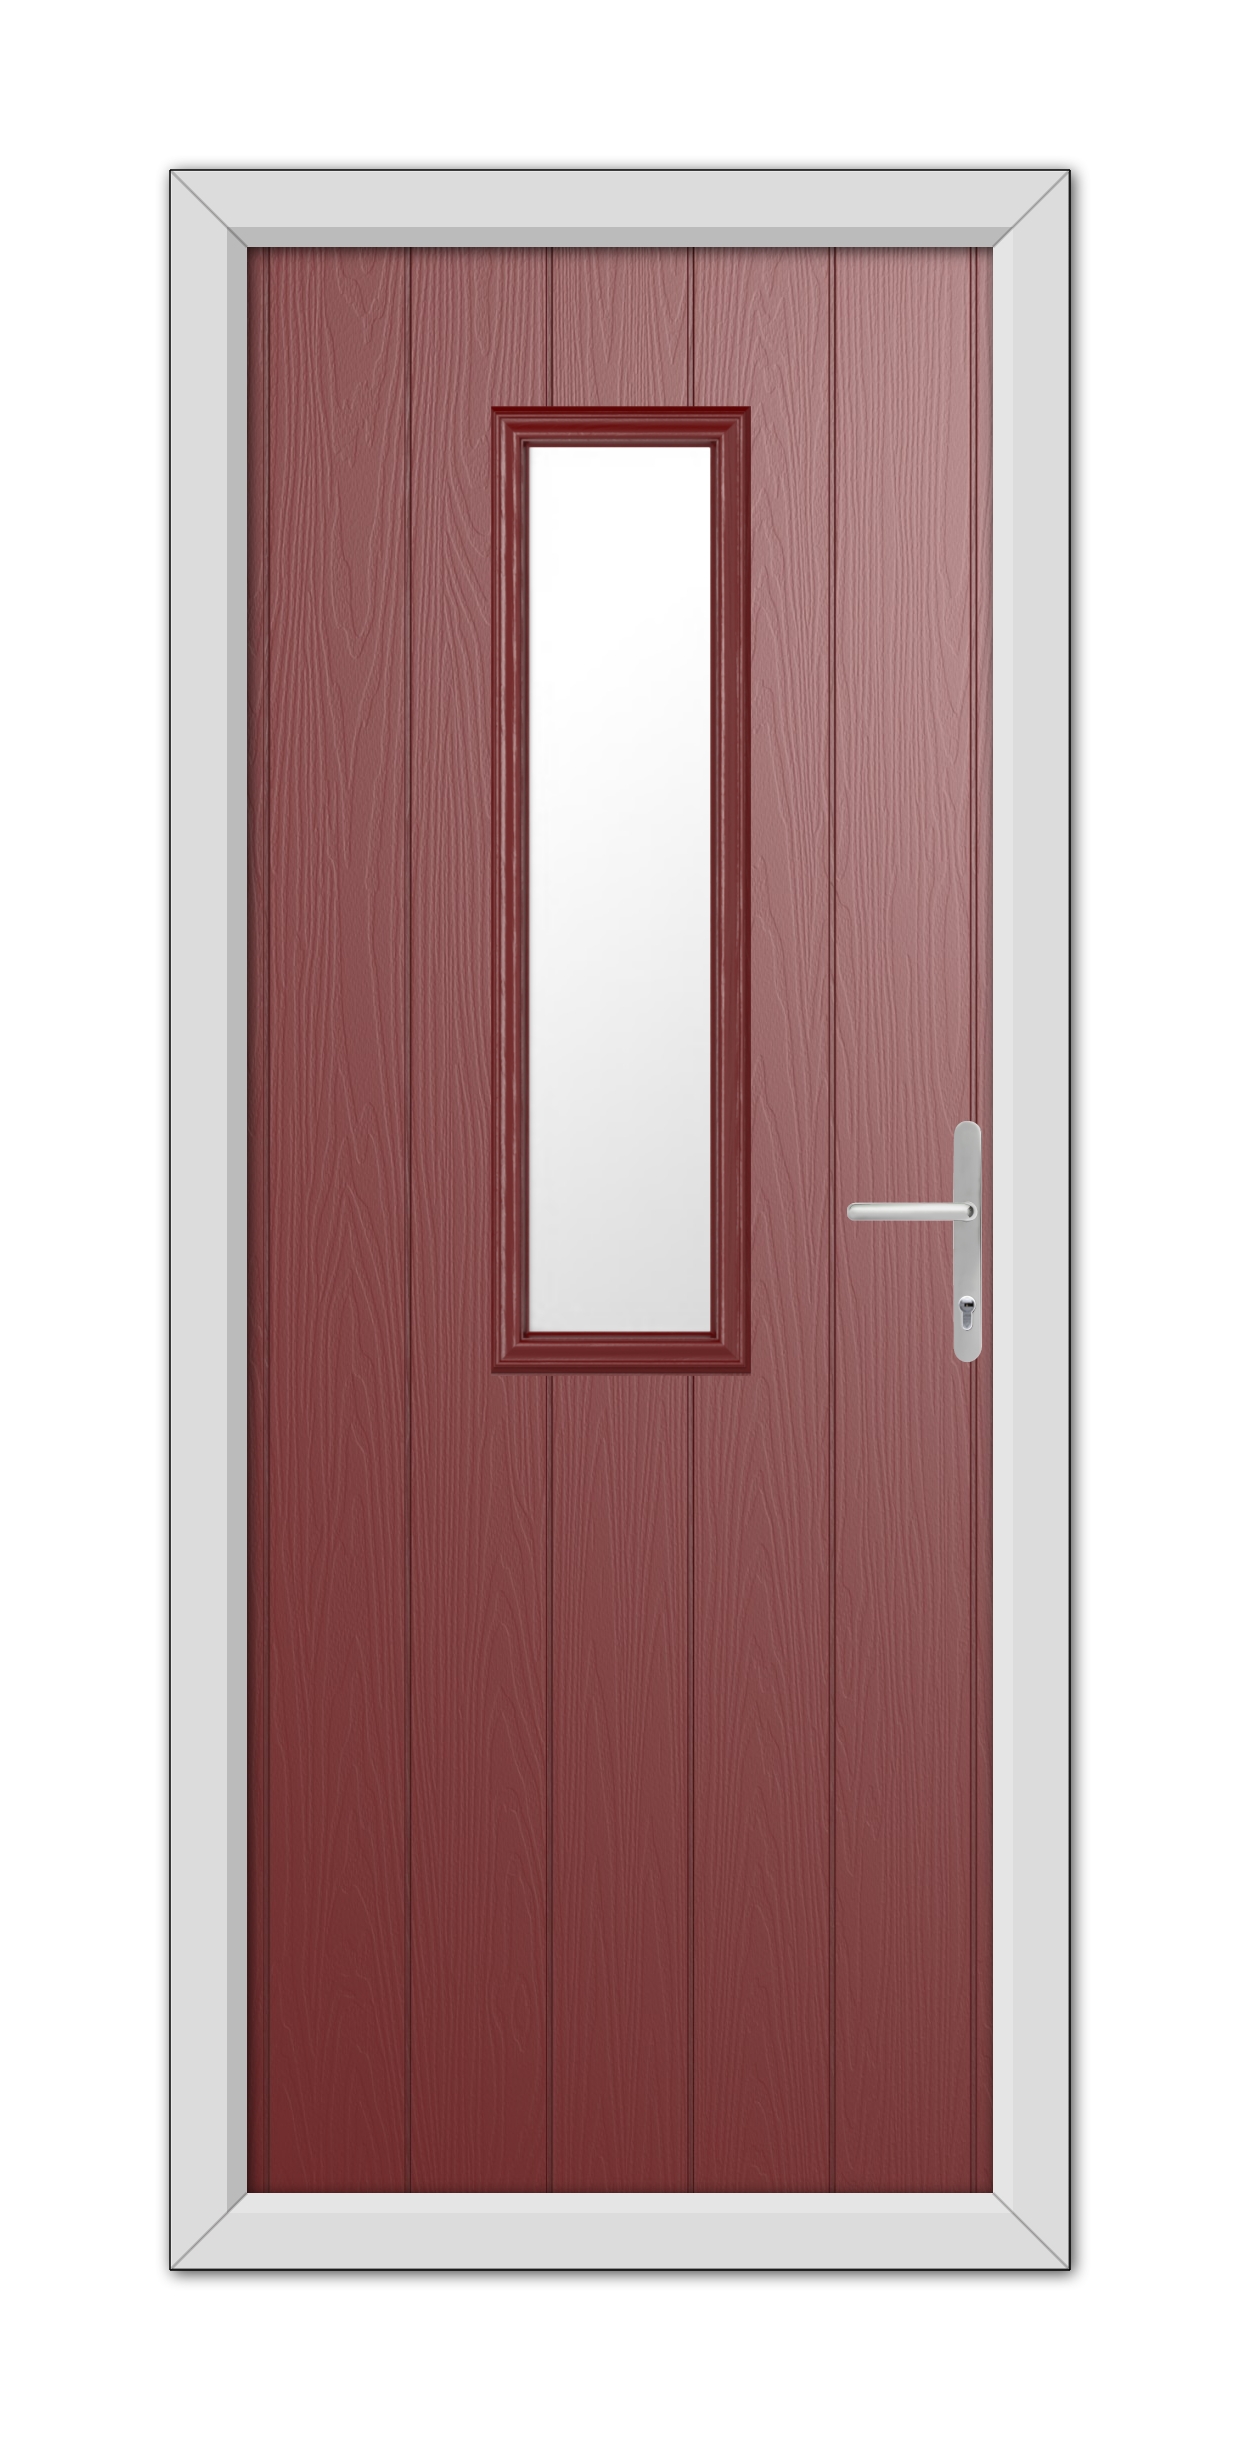 A Red Mowbray Composite Door 48mm Timber Core with a vertical window in the center, framed in white, featuring a modern silver handle on the right.